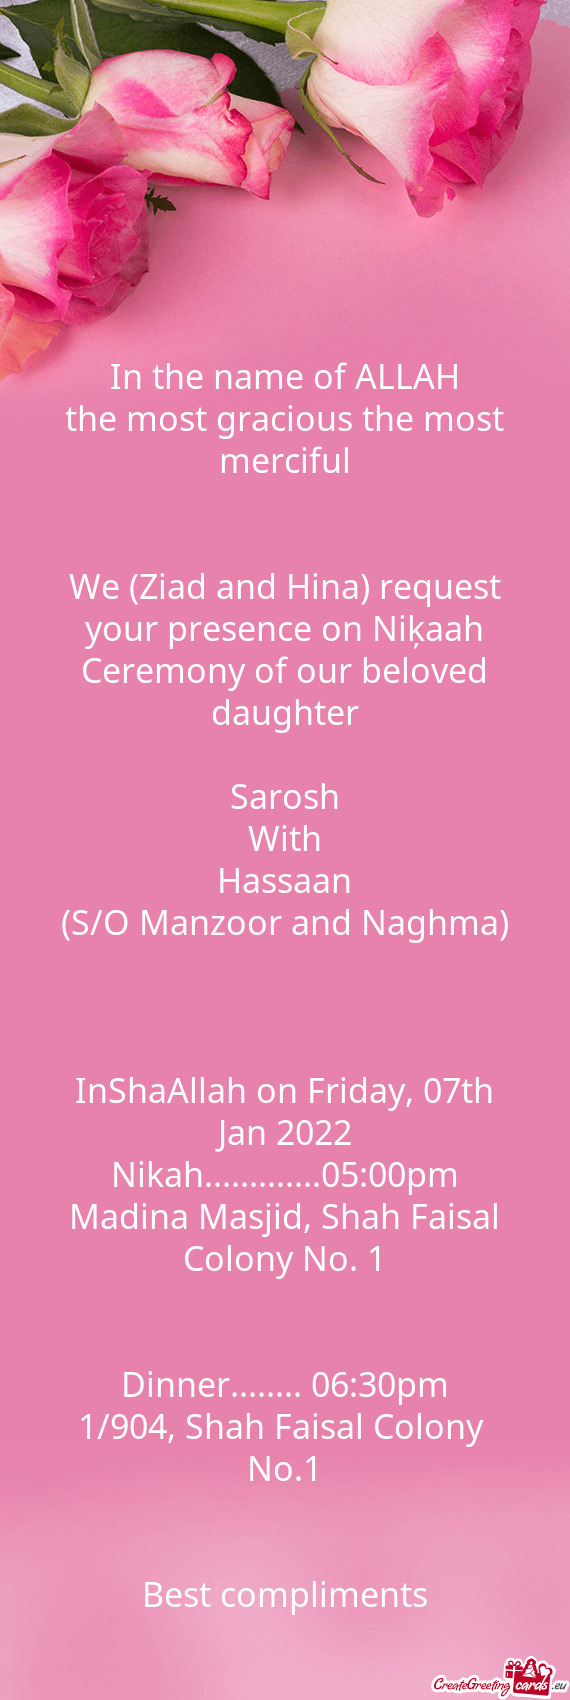 We (Ziad and Hina) request your presence on Niķaah Ceremony of our beloved daughter